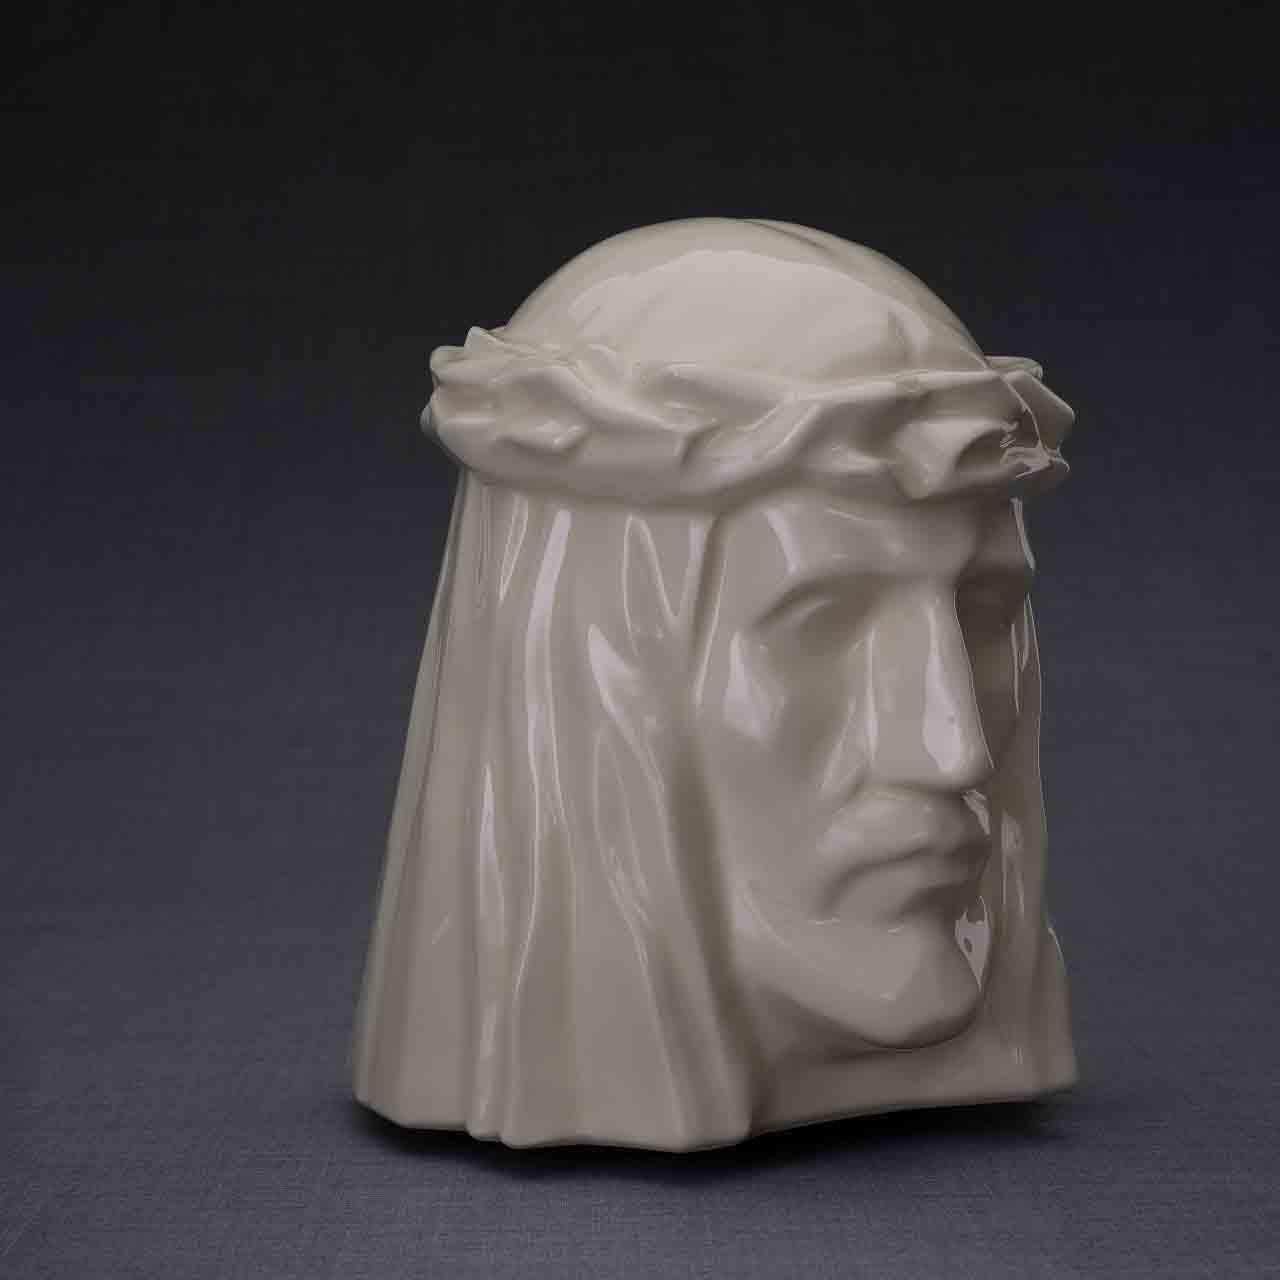 The Christ Cremation Urn for Ashes in Cream Turned Right Dark Background